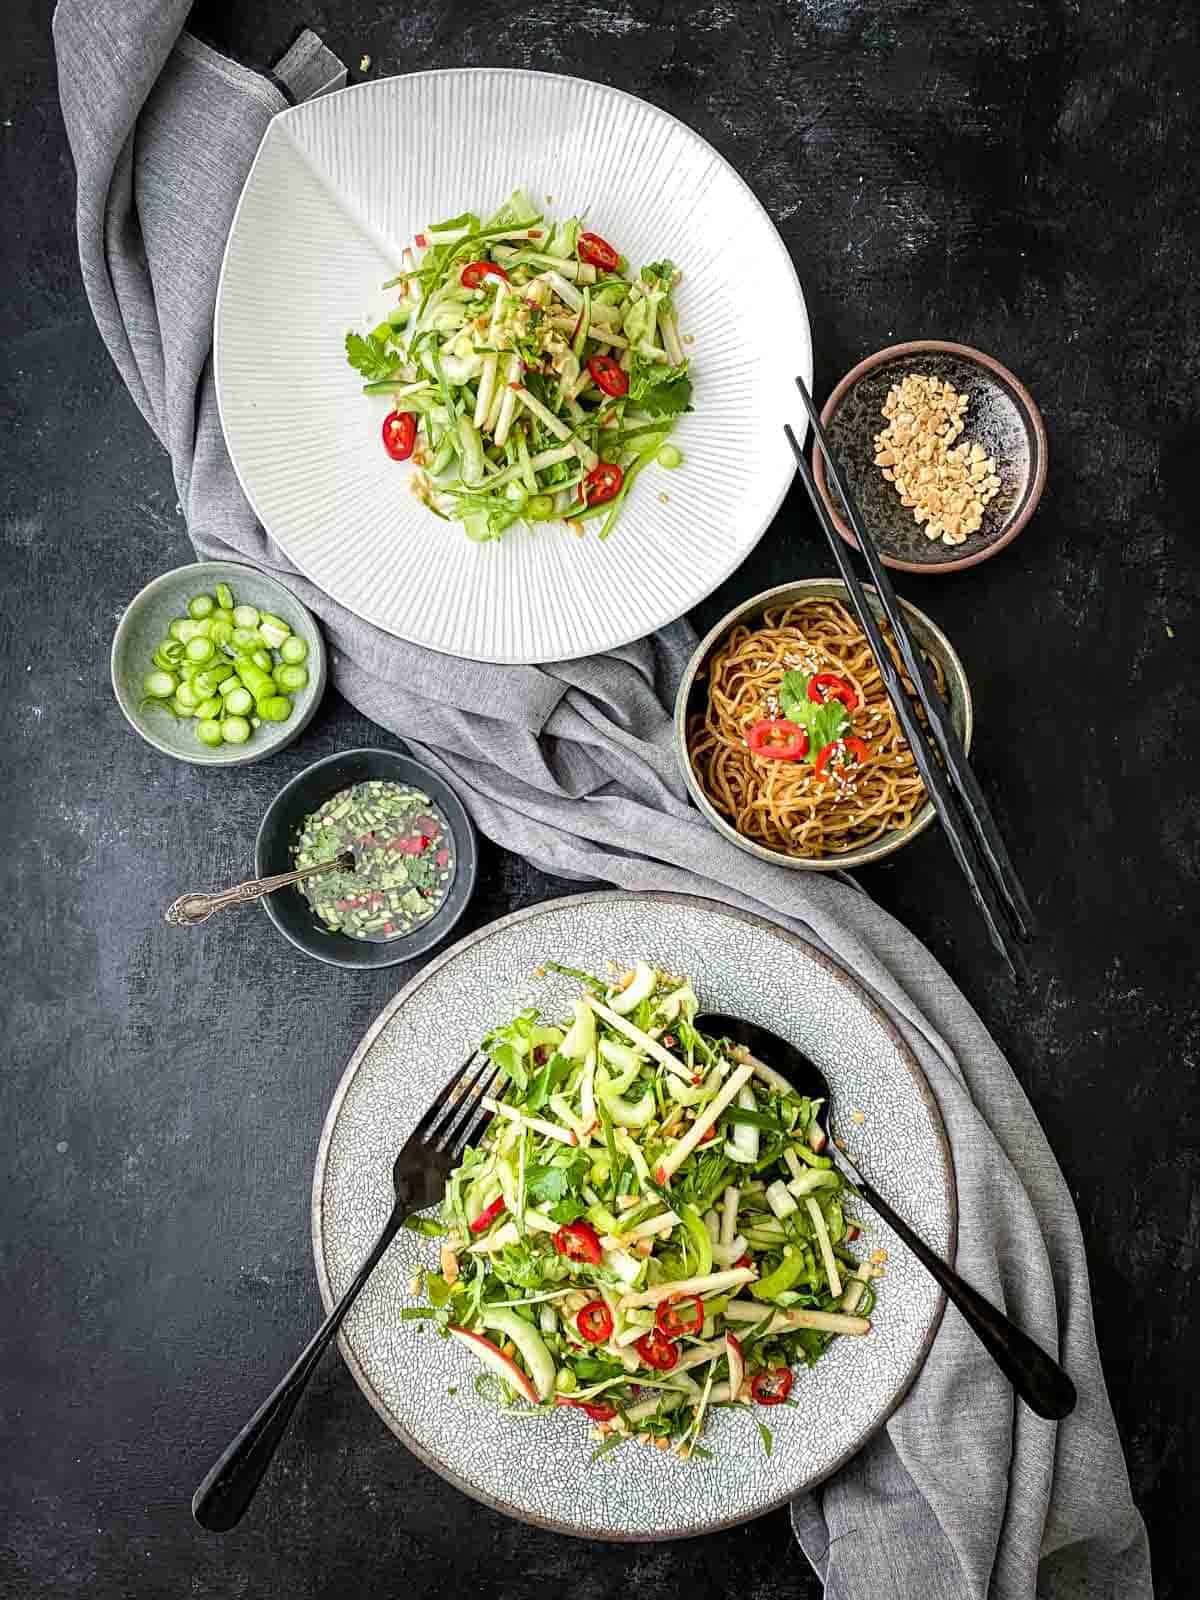 Pak Choy Salad with Coriander Lime Dressing